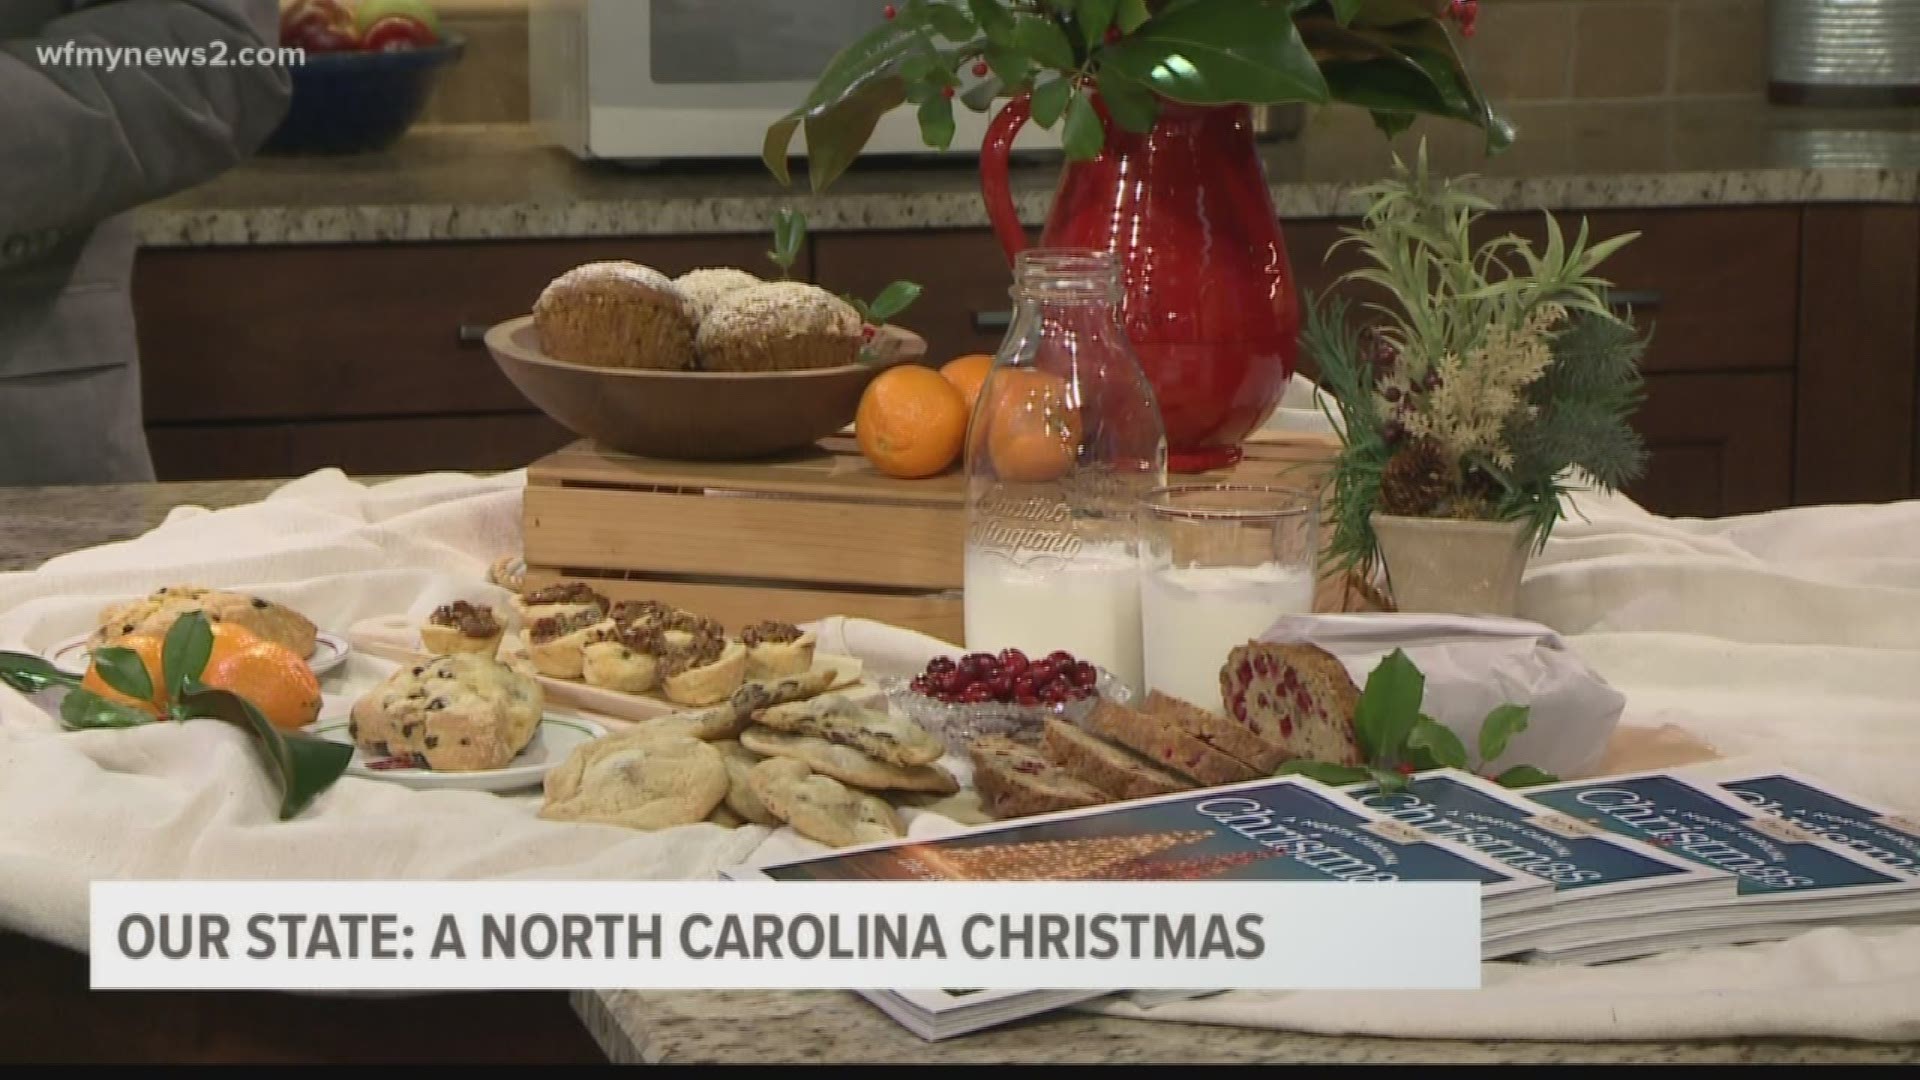 Our State Magazine joins the Good Morning Show to review savory and sweet recipes found in their Christmas special edition